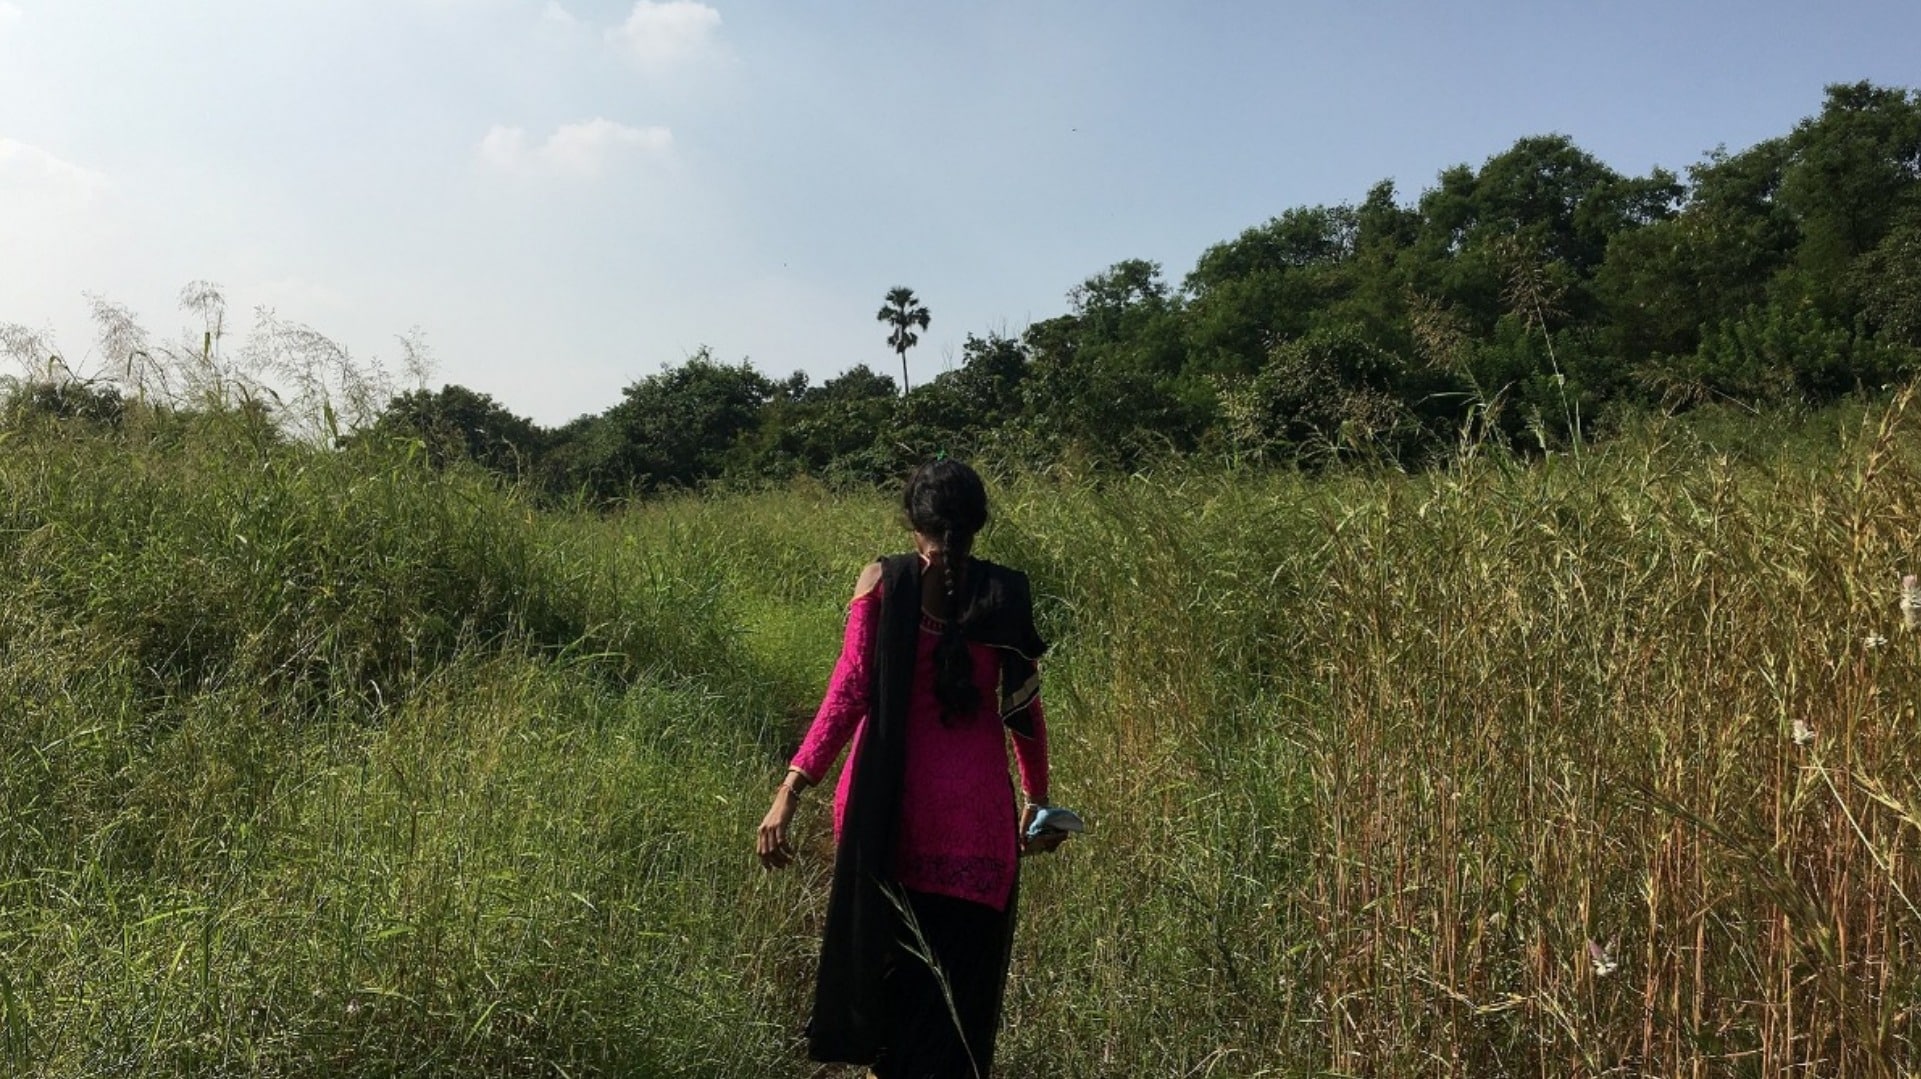 Warli tribe’s Save Aarey movement serves as beacon of community spirit and inclusive activism